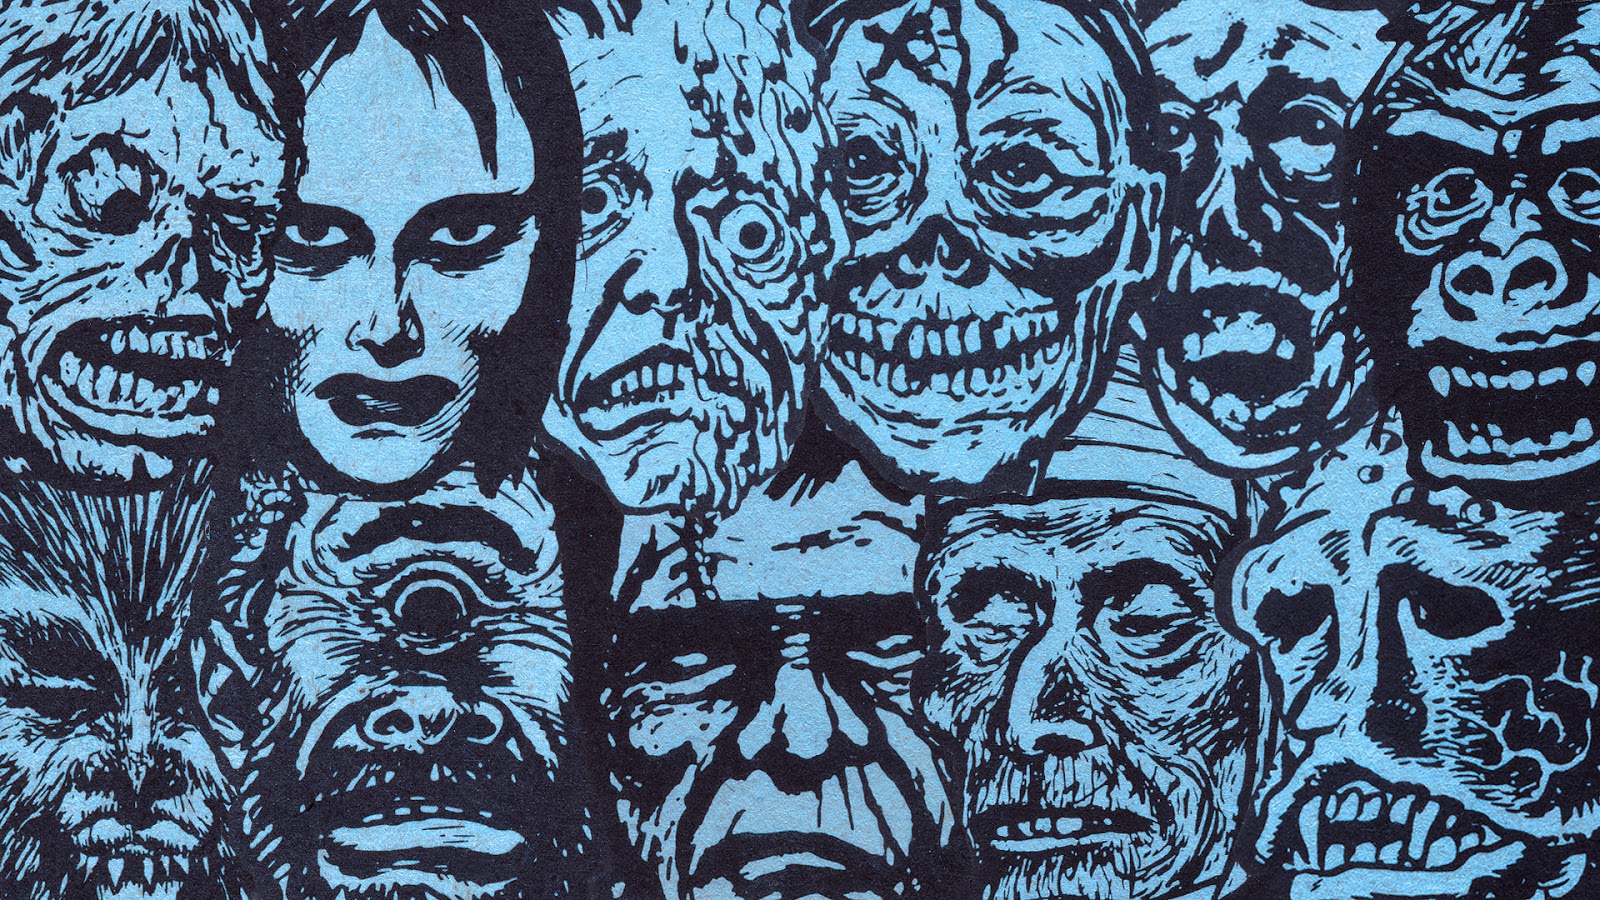 Ing Gallery For Classic Horror Monsters